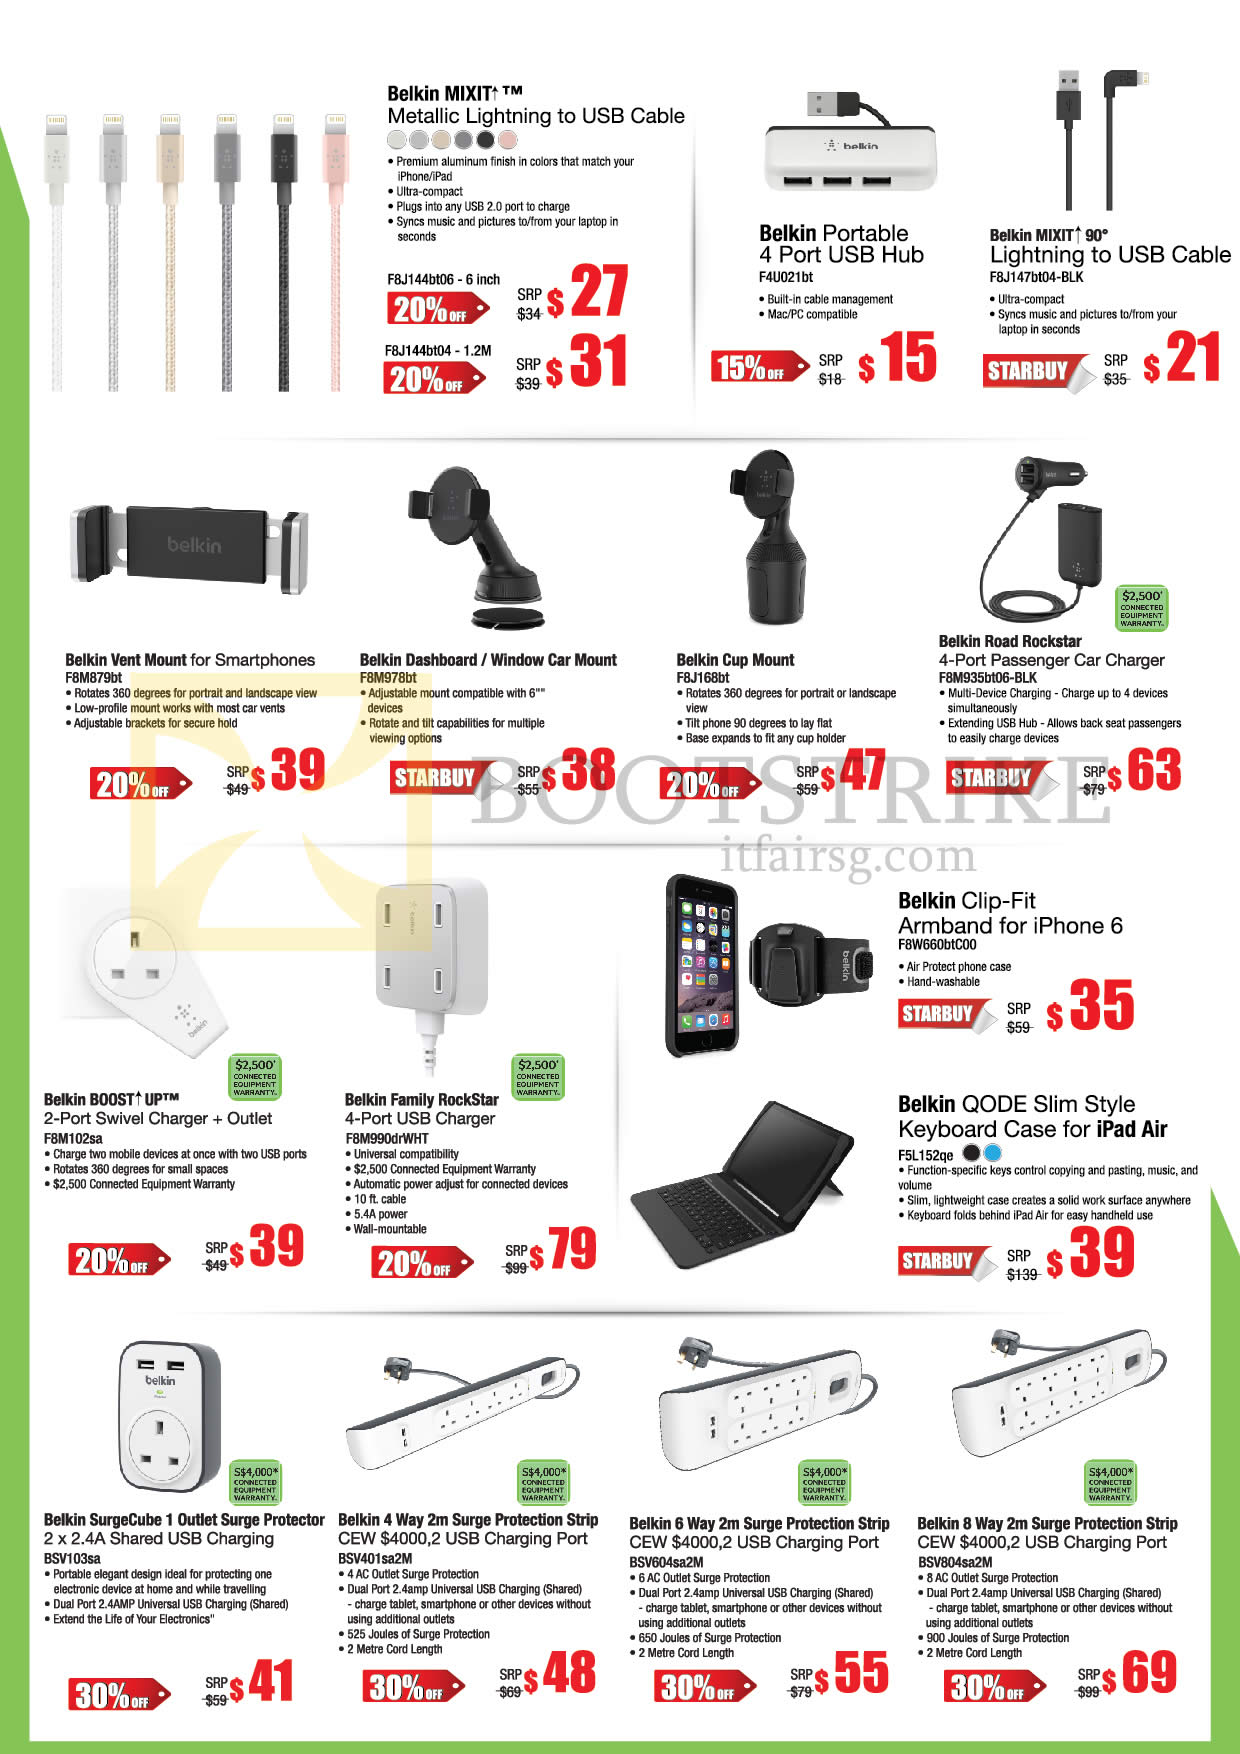 PC SHOW 2016 price list image brochure of Nubox Belkin Accessories Mixit Lightning To USB Cable, USB Hub, Mounts, Charger, Armband, Keyboard Case, Surge Protector Strip